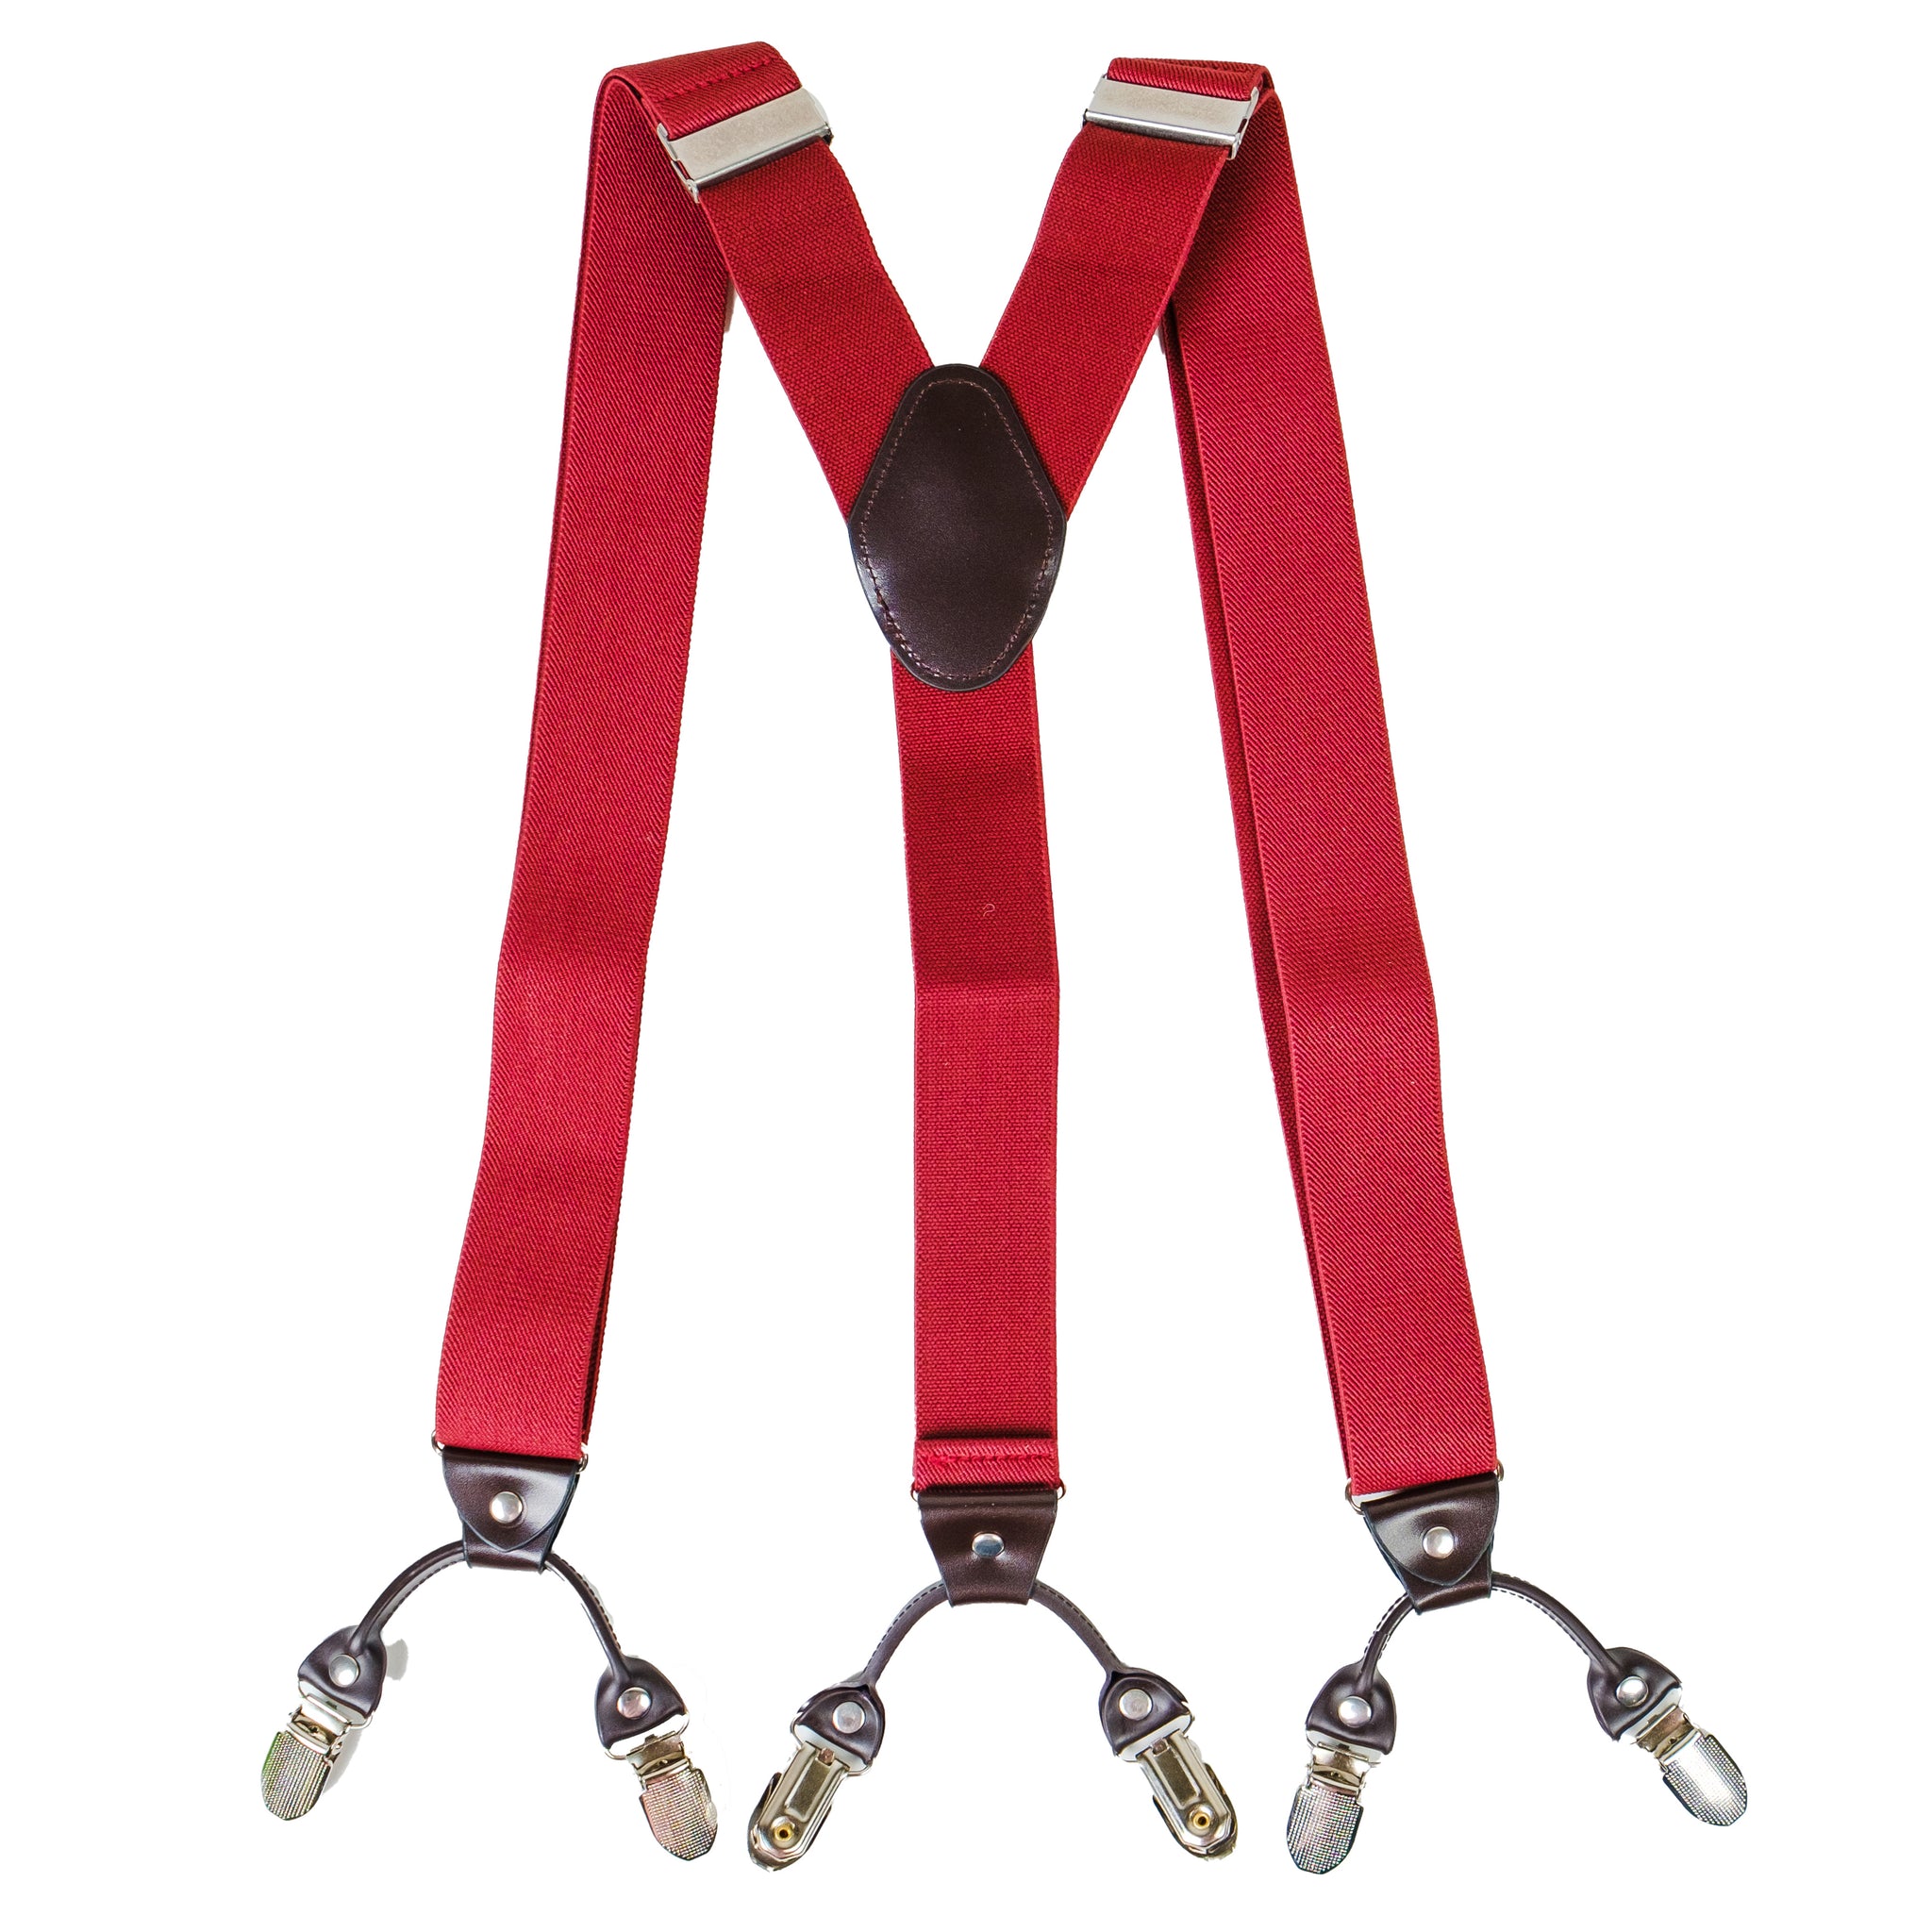 Chokore Stretchy Y-shaped Suspenders with 6-clips (Burgundy)